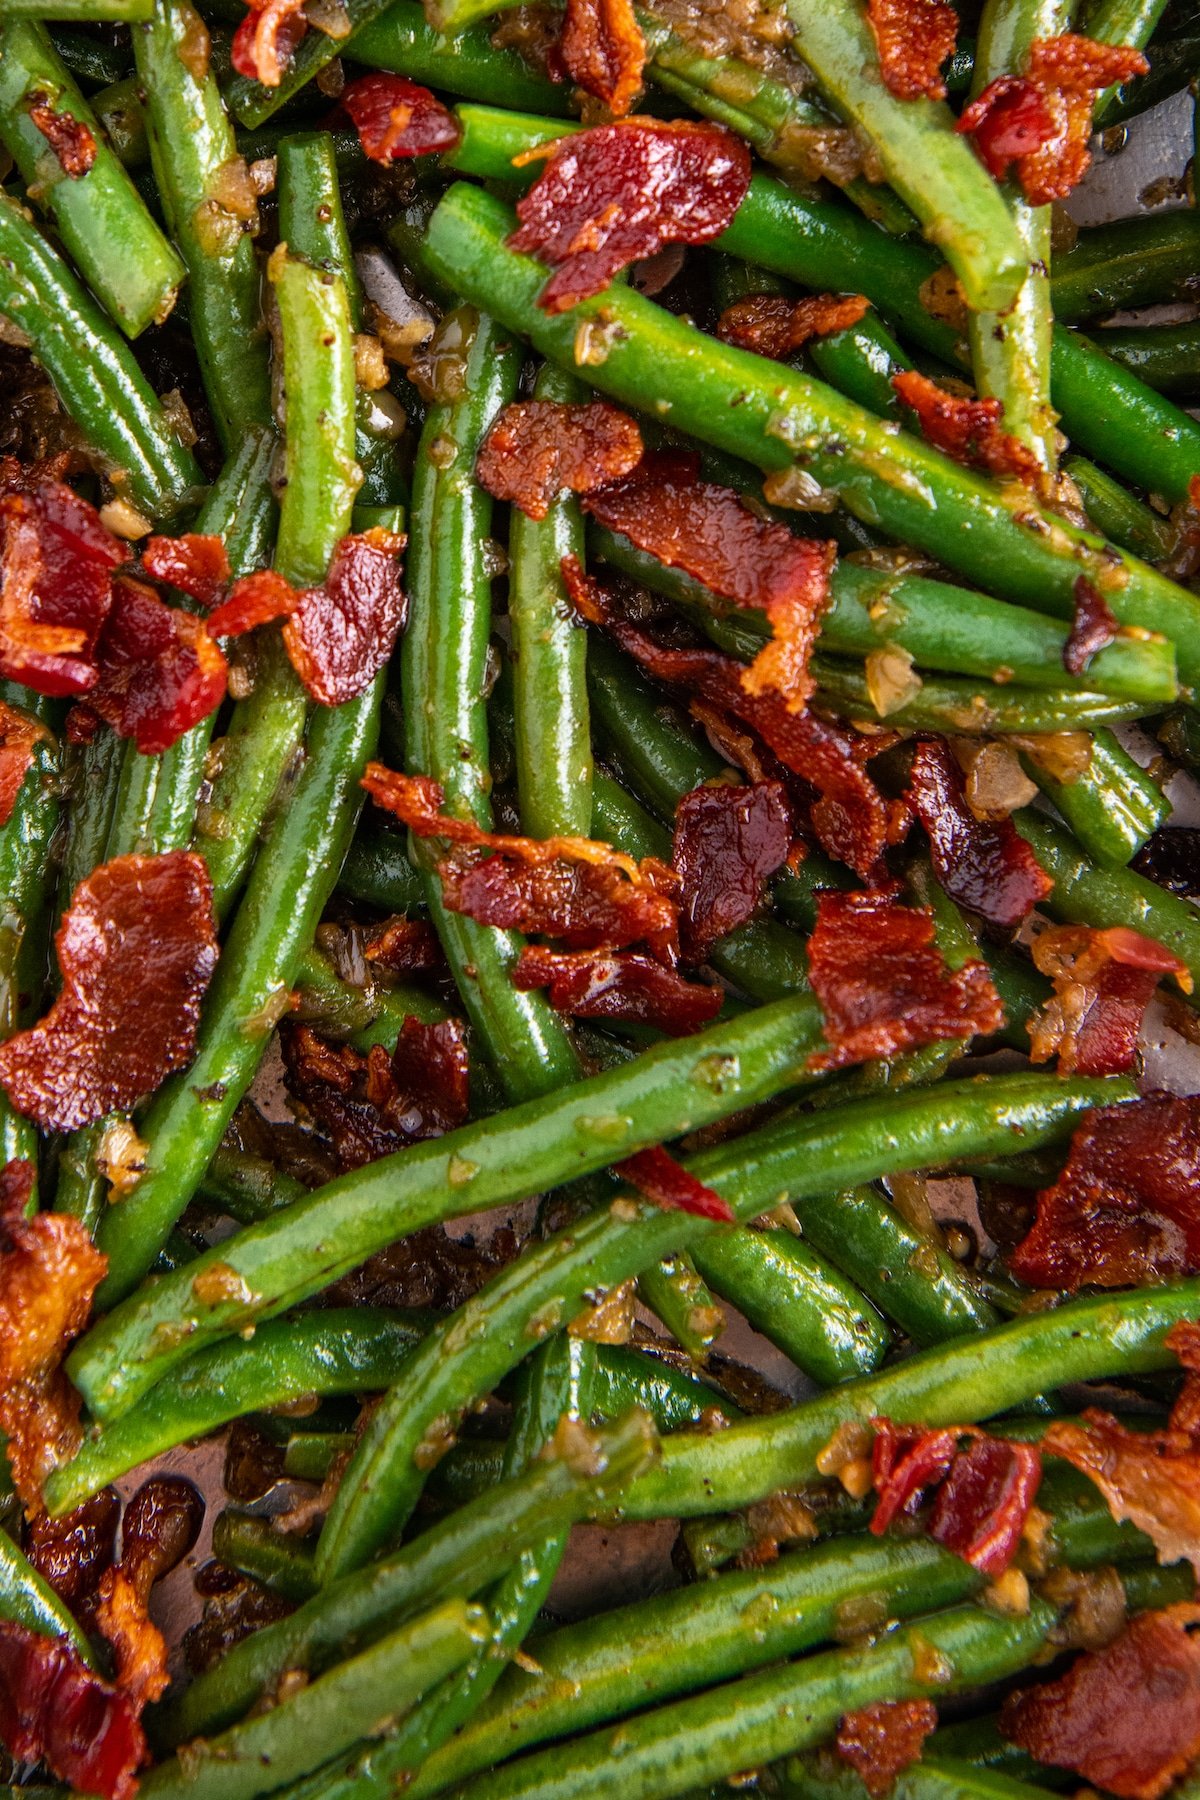 Sautéed green beans with fried bacon on top.